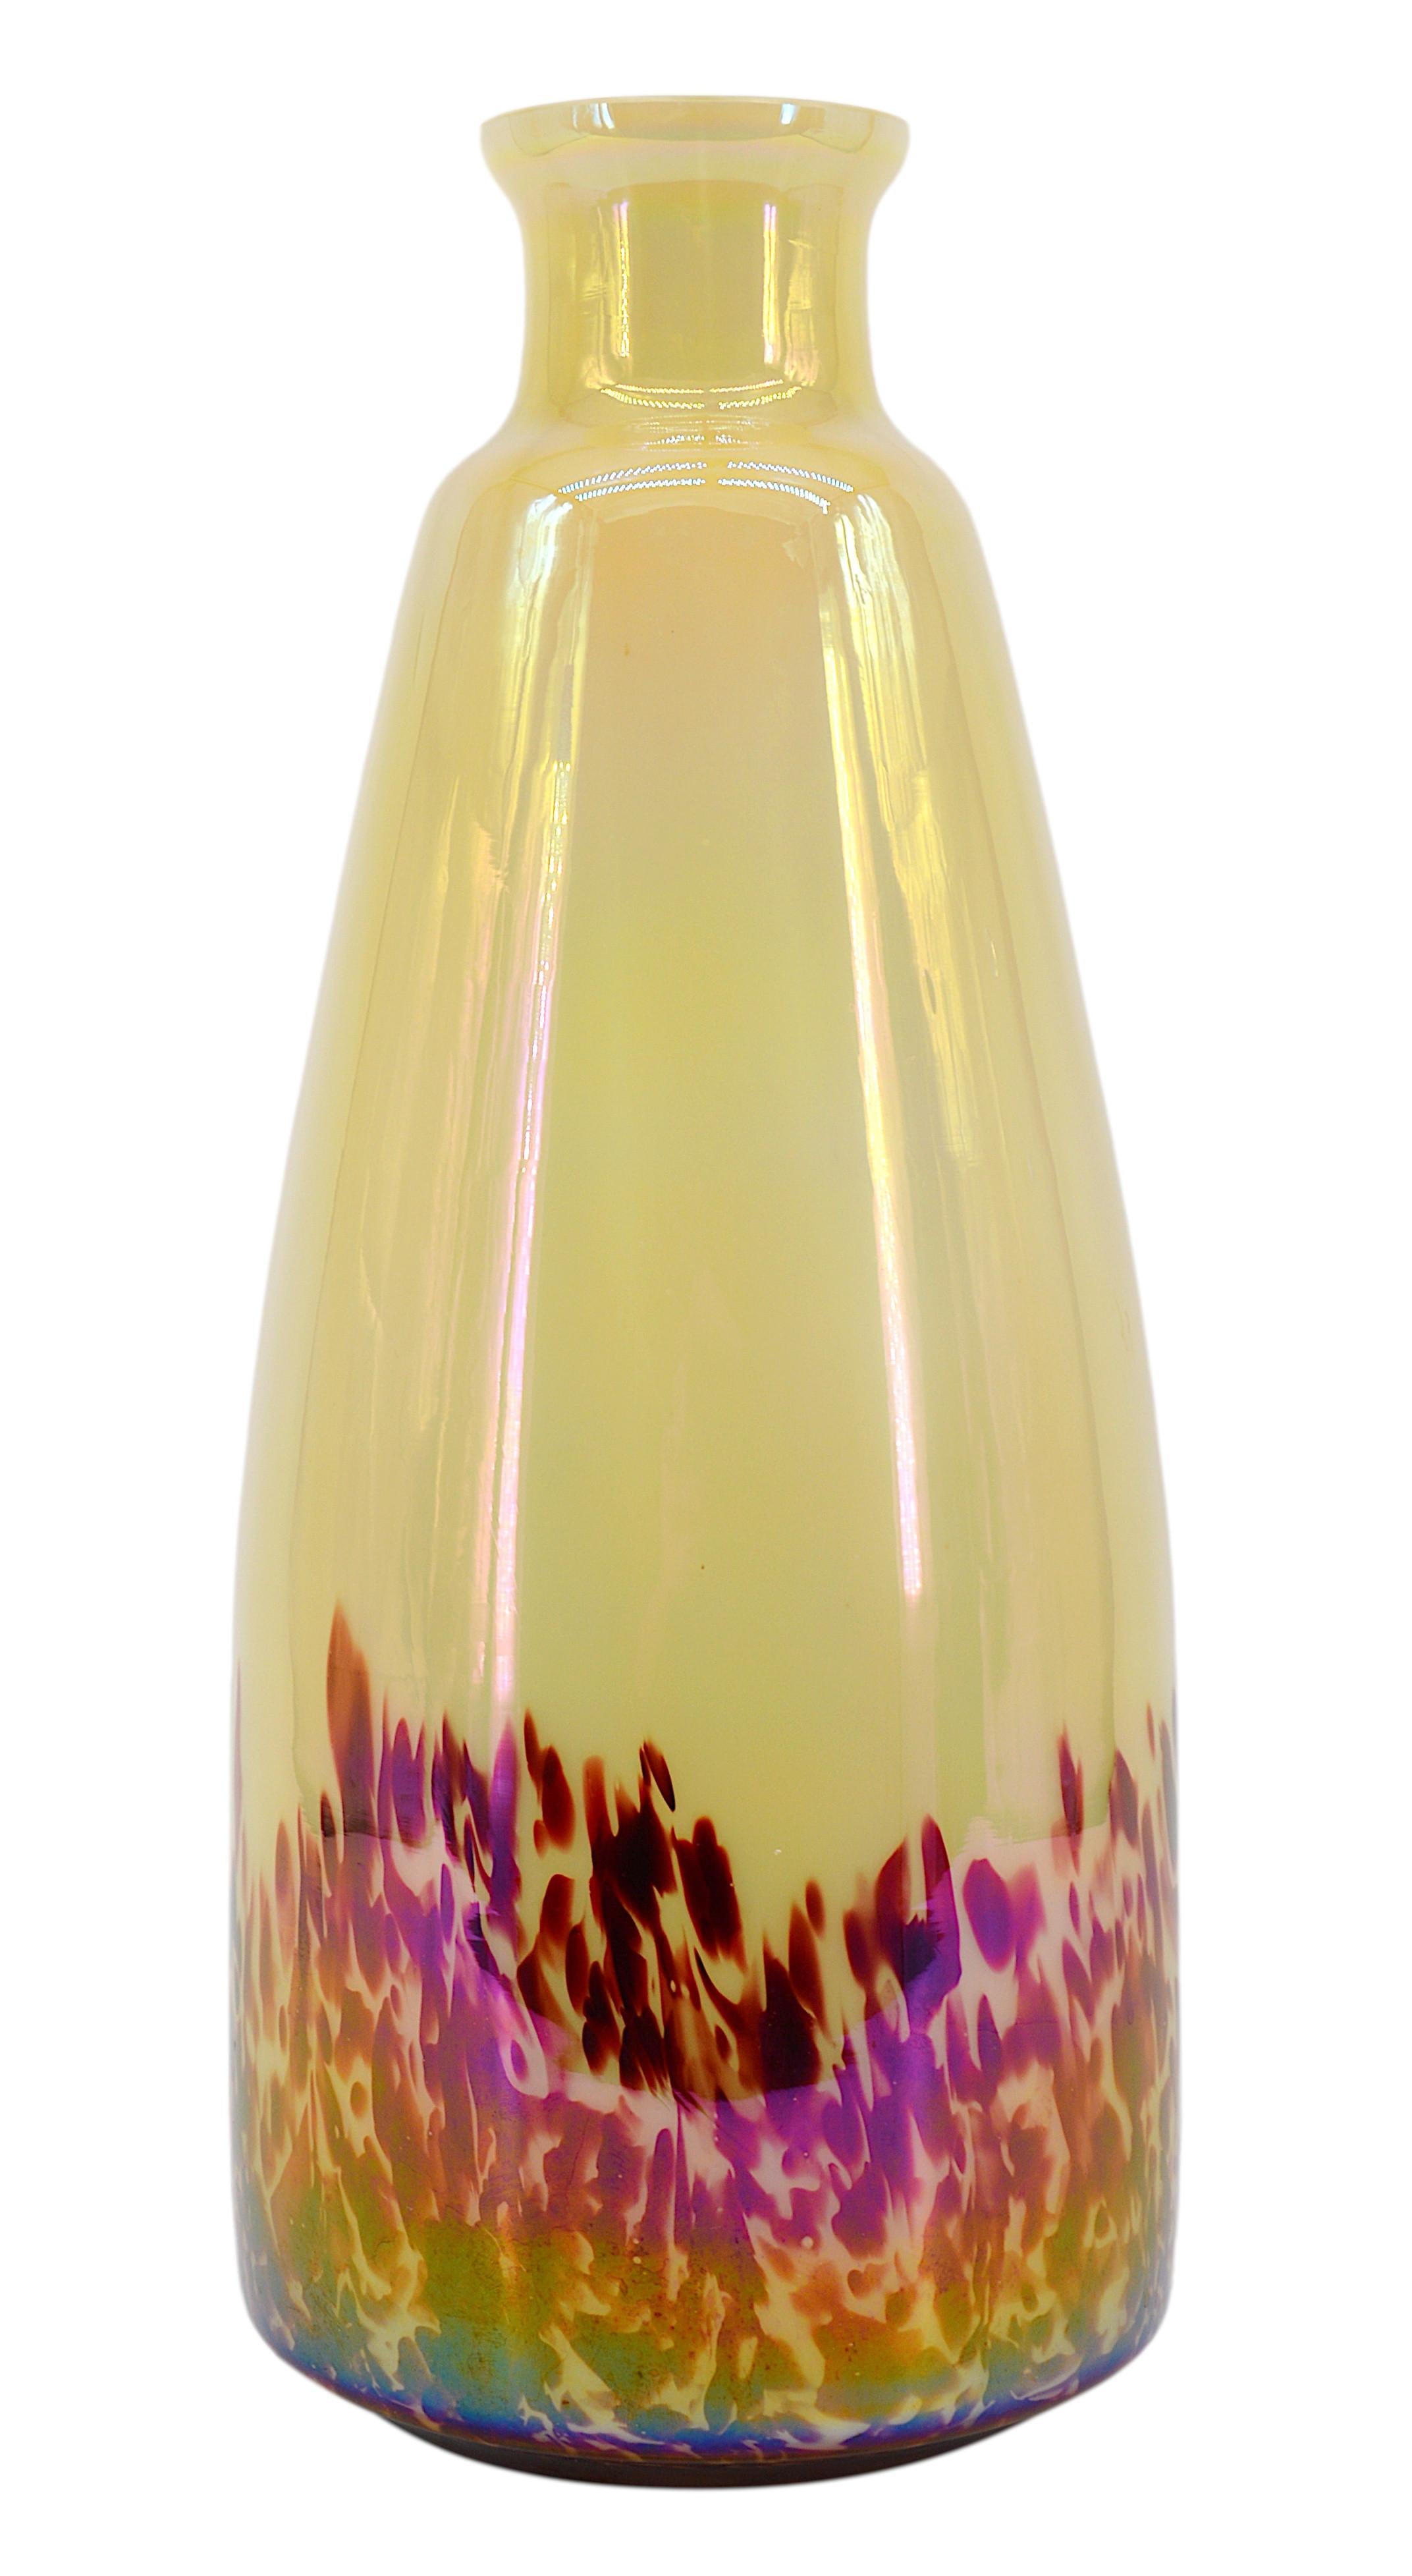 Large art glass vase by KRALIK (Bohemia), ca.1920. Blown double glass with an iridescent effect on the outter layer. Measures: Height : 16.1